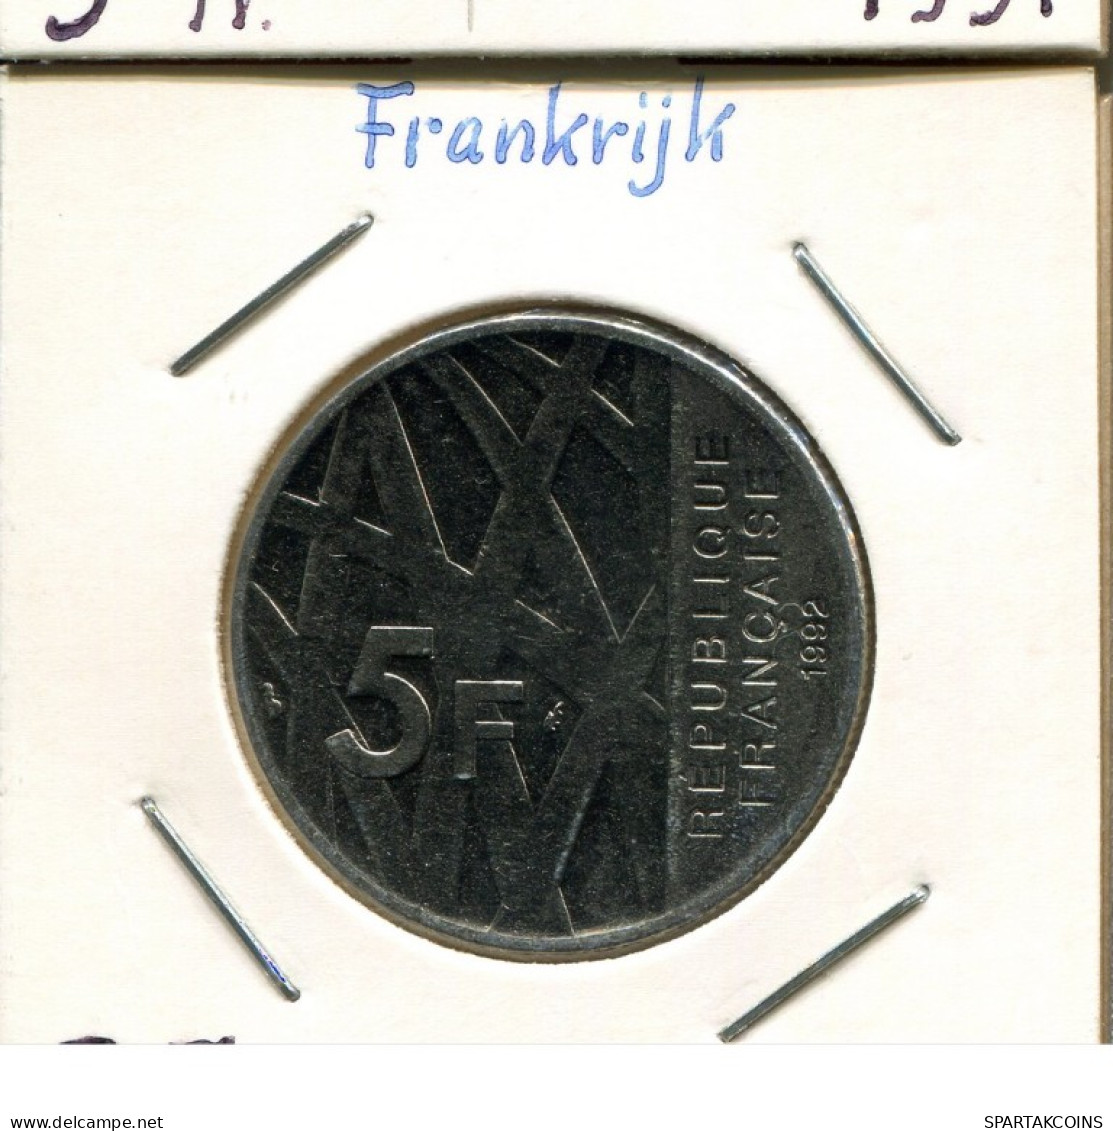 5 FRANCS 1992 FRANCE Coin French Coin #AM389.U.A - 5 Francs